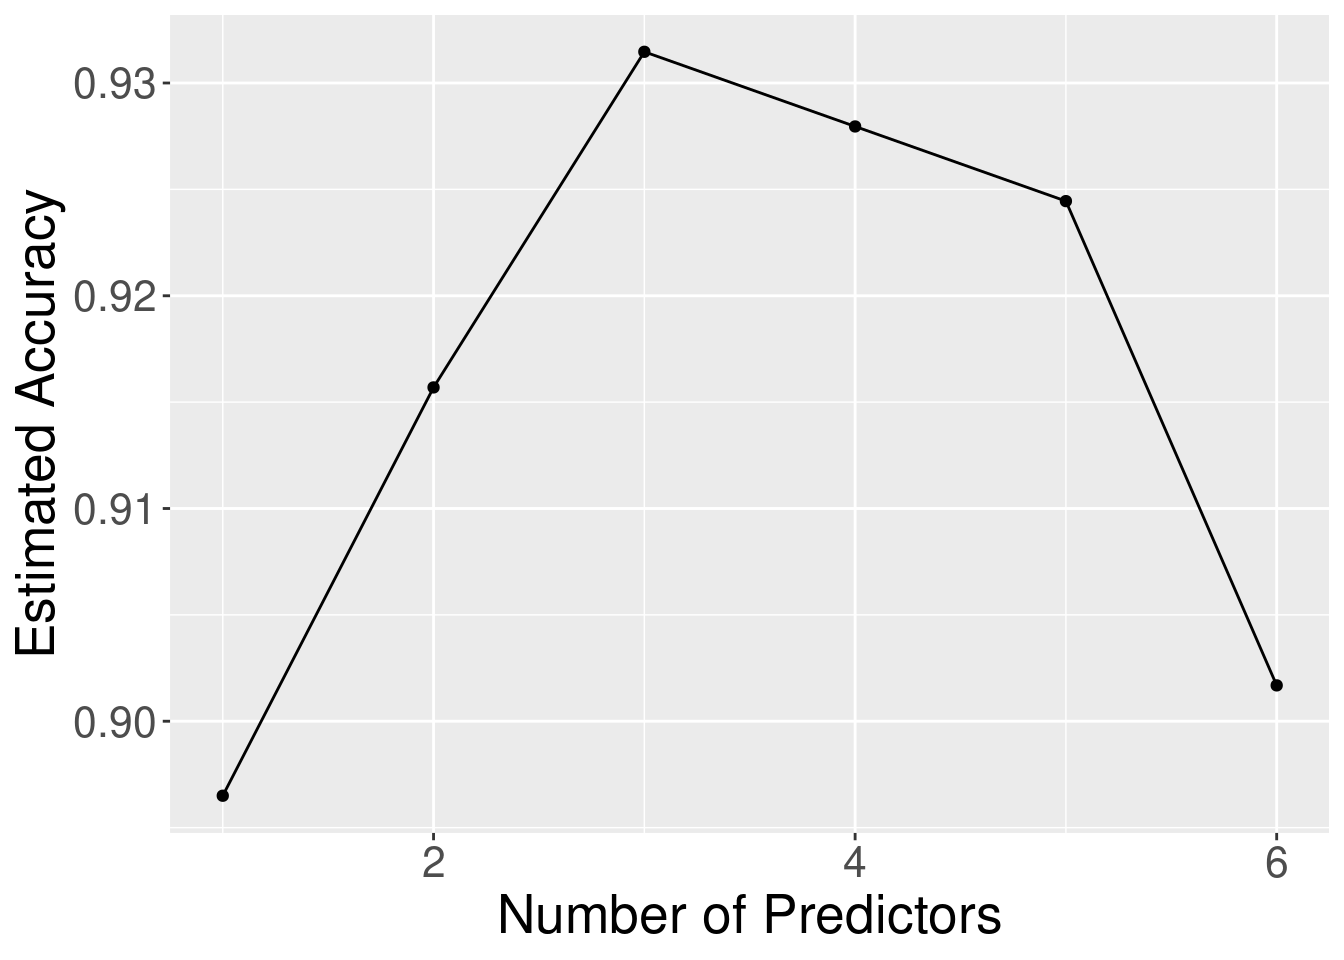 Estimated accuracy versus the number of predictors for the sequence of models built using forward selection.